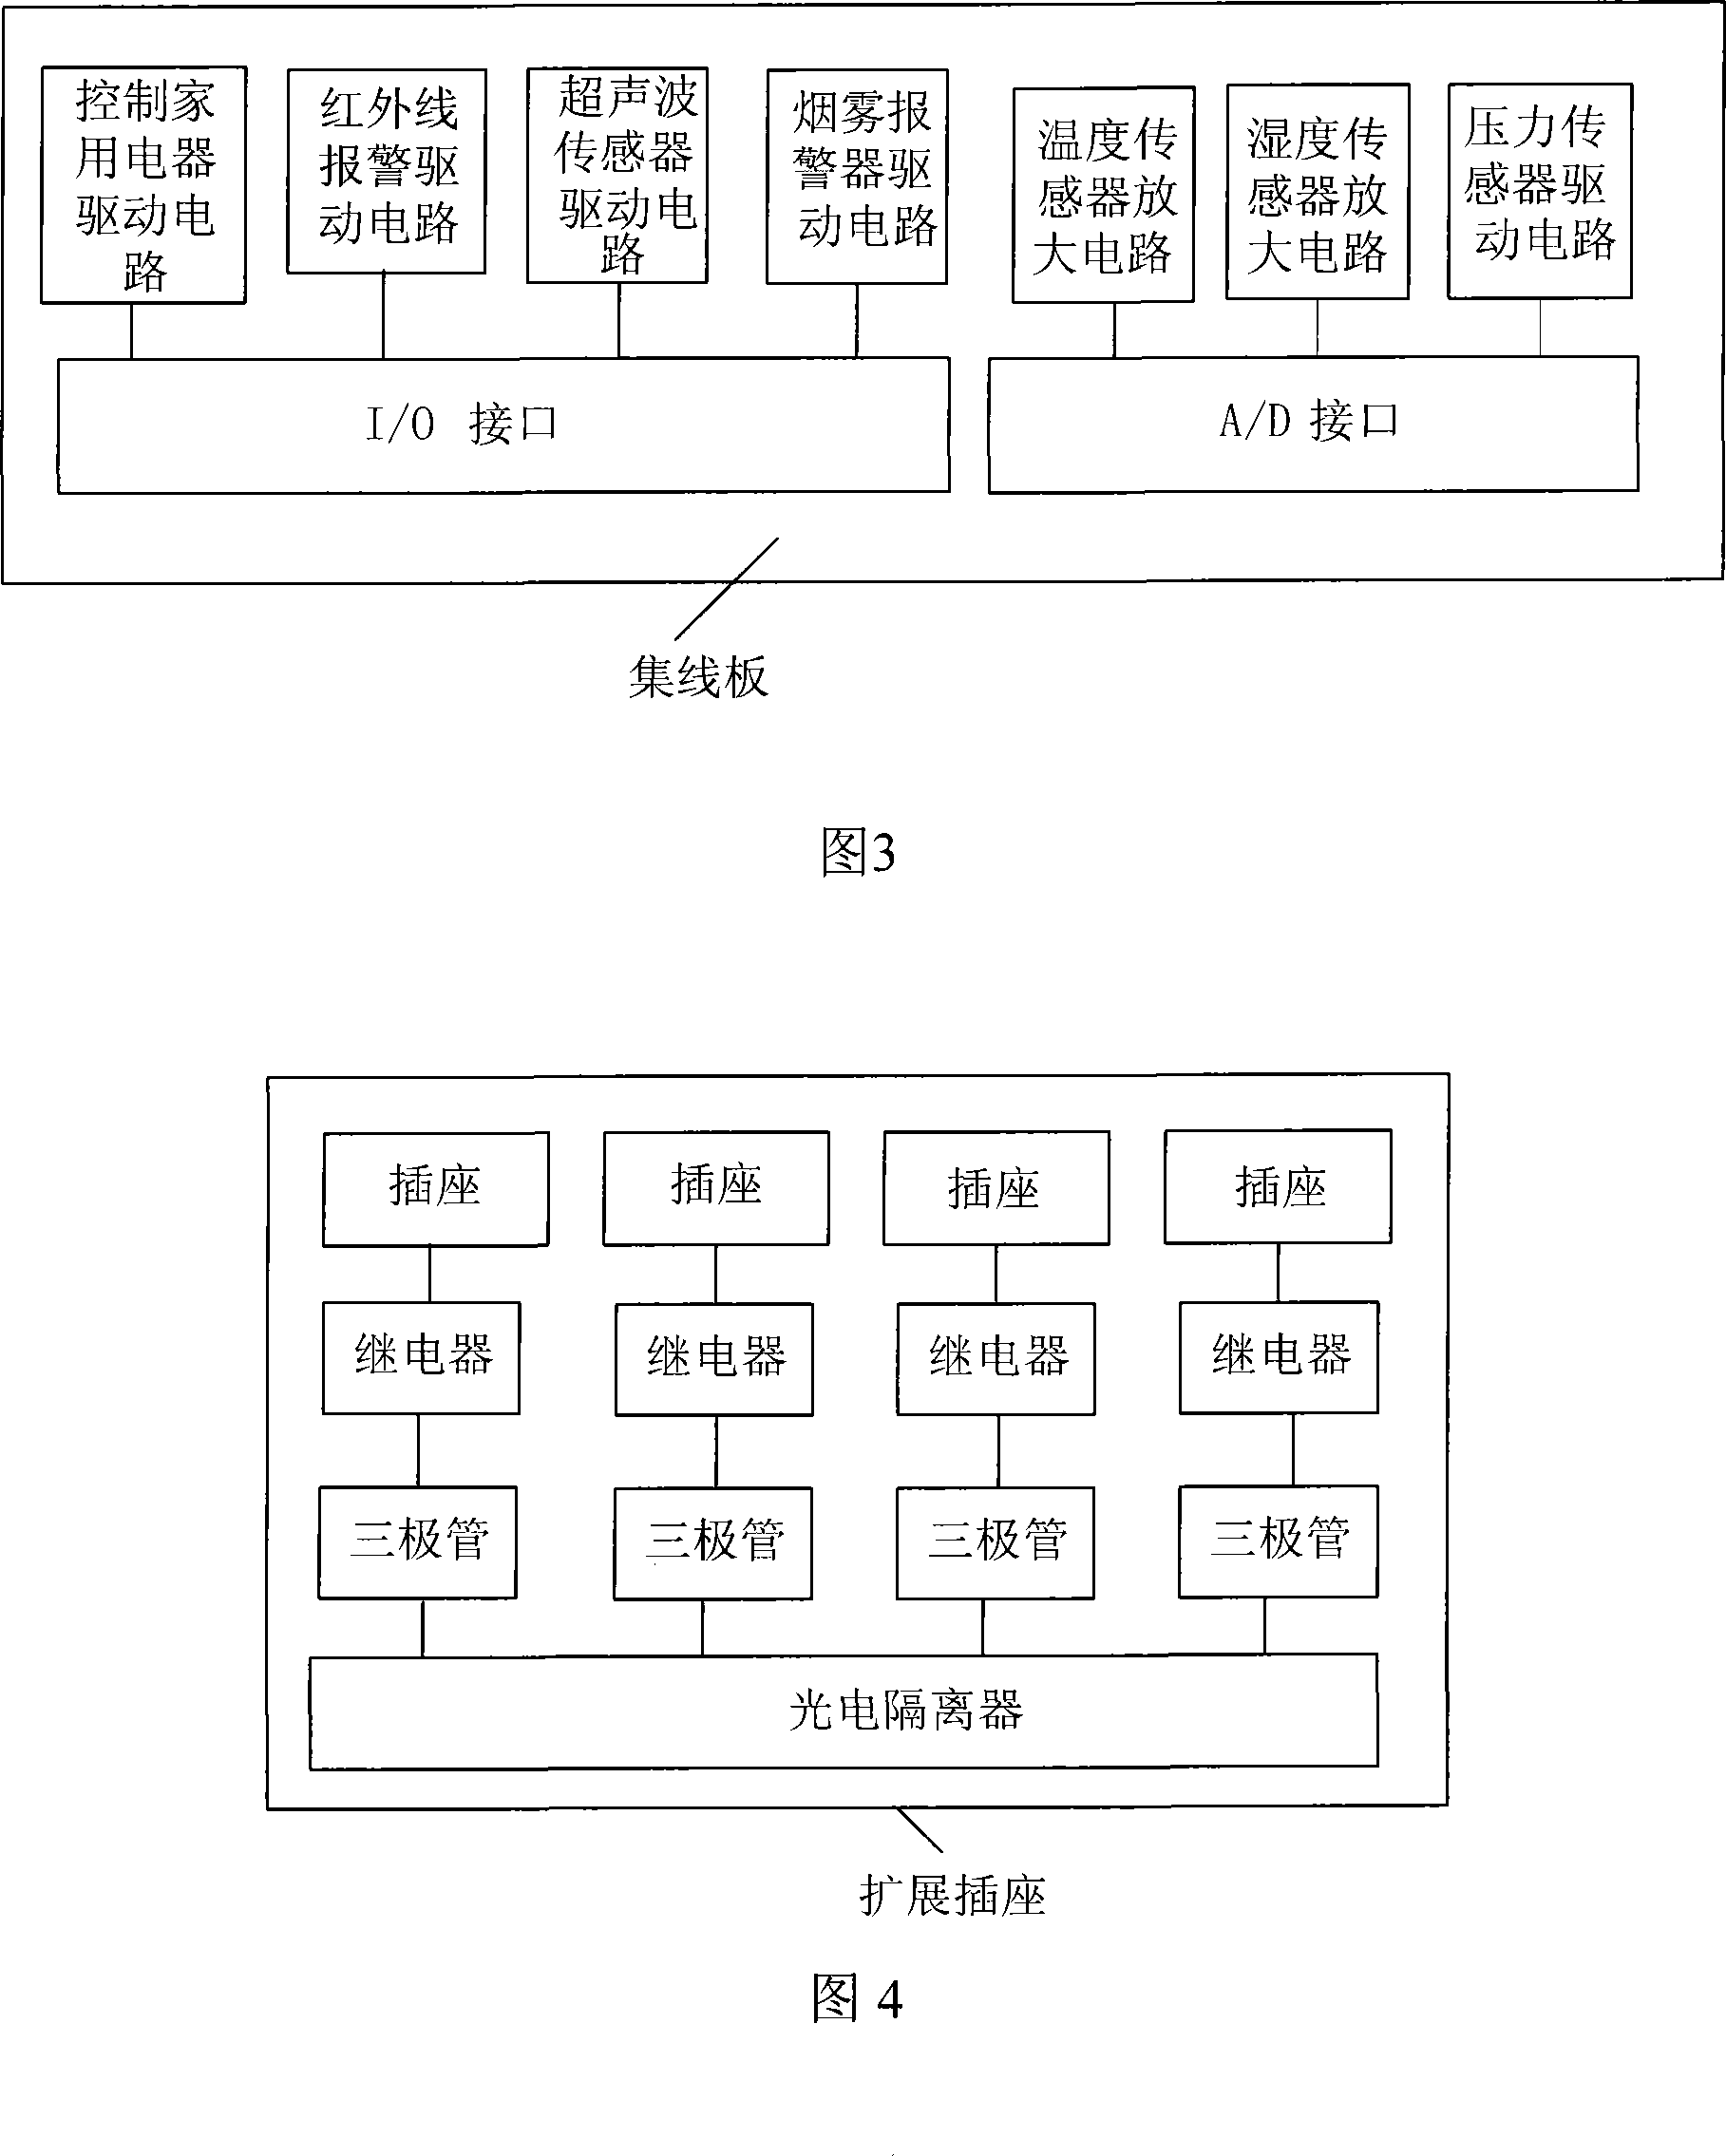 Remote network household electrical appliance control system and its control method